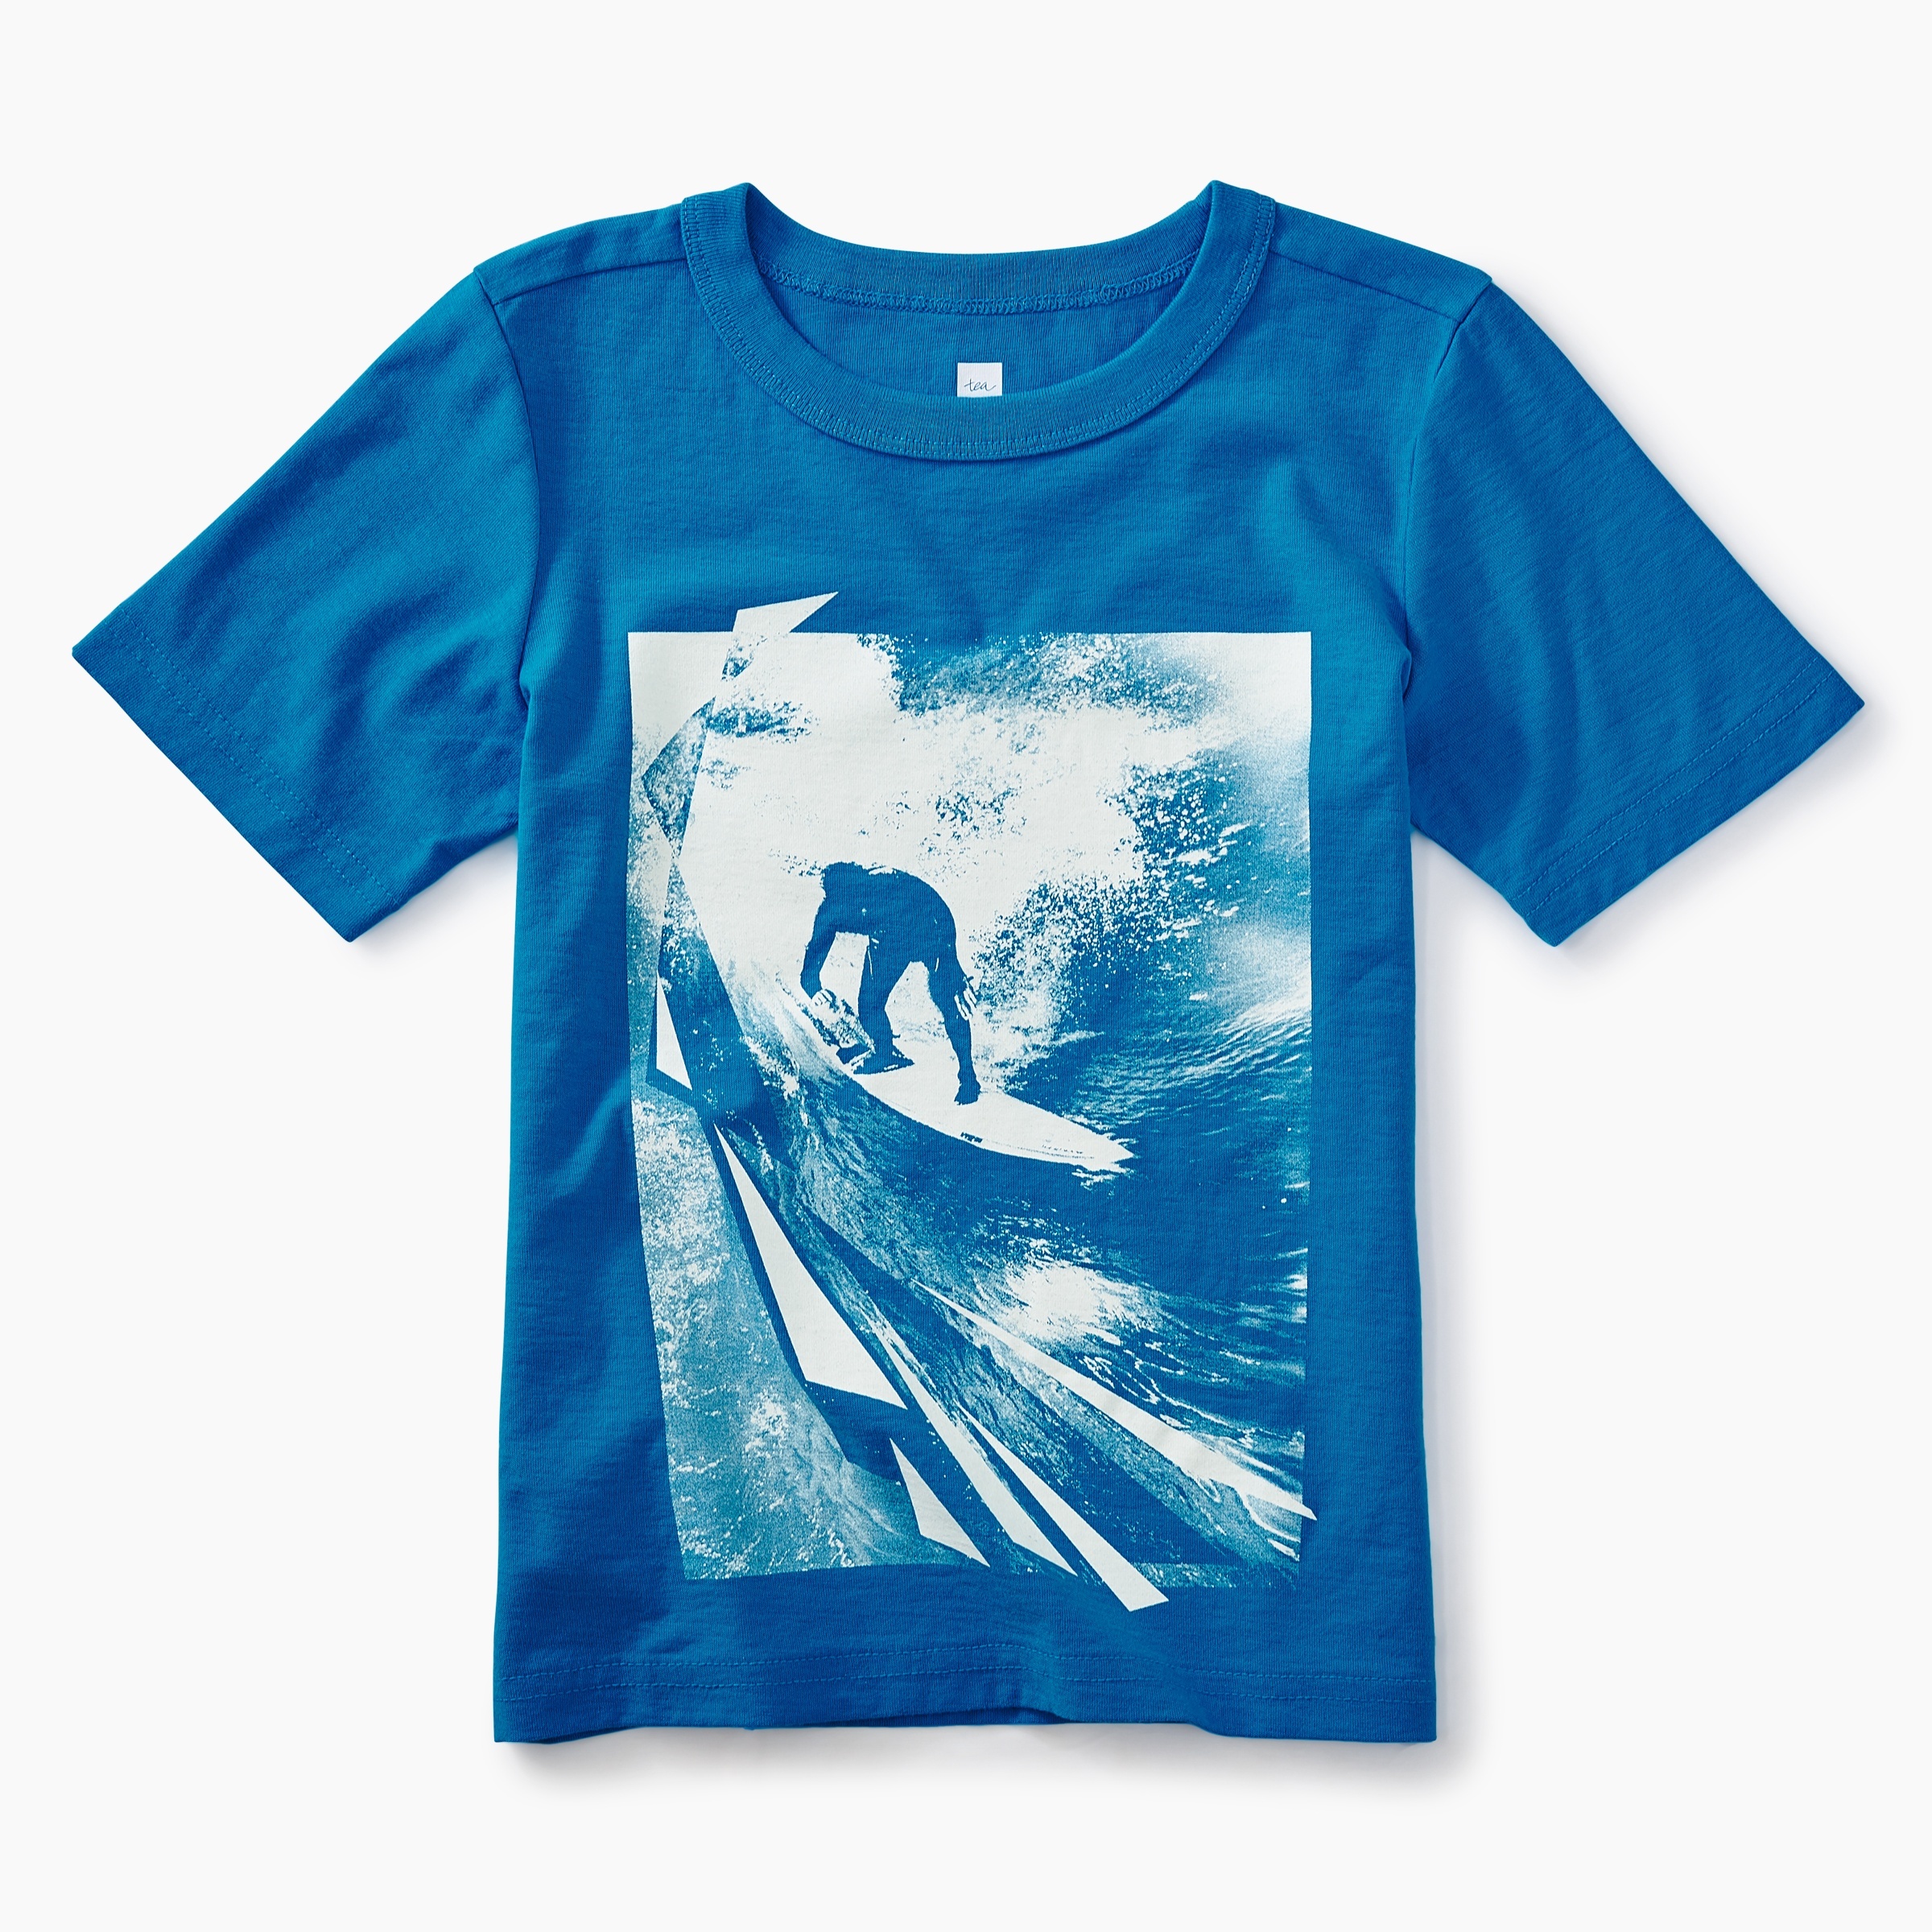 Photoreal Surf Graphic Tee | Tea Collection